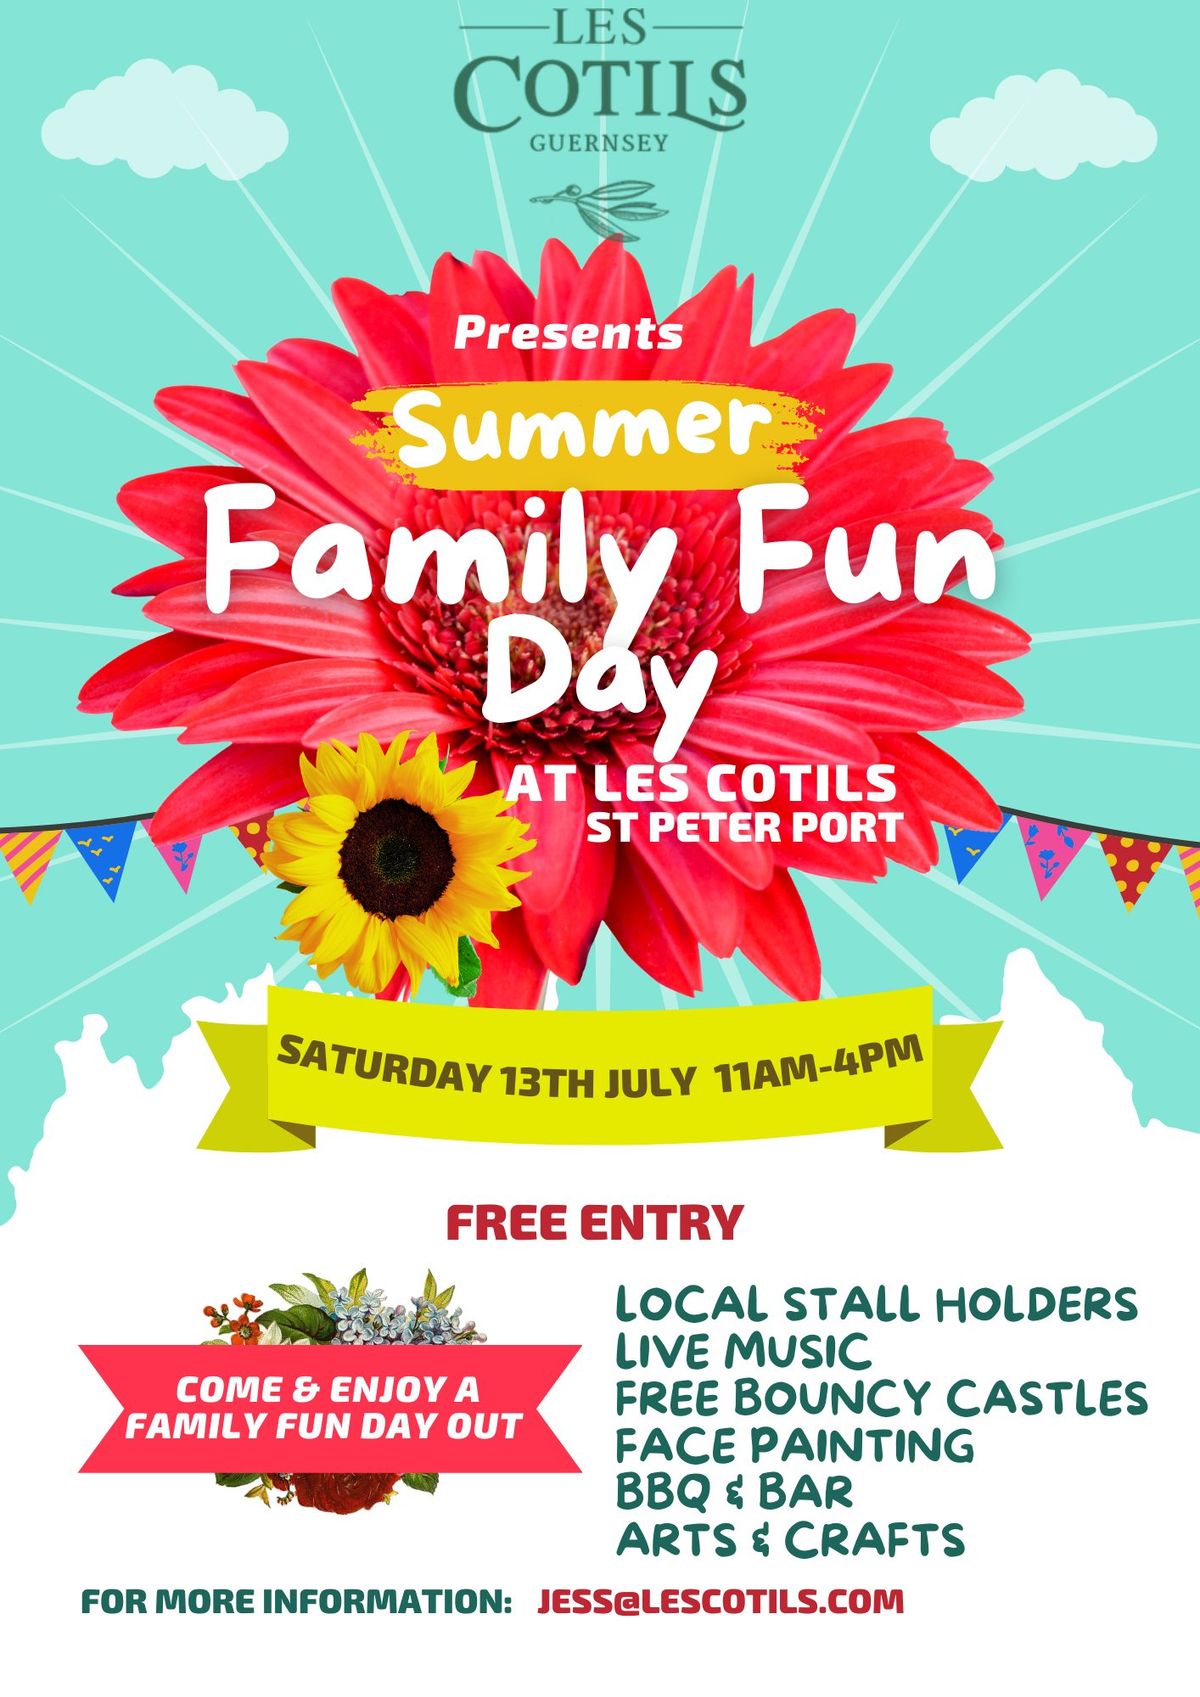 Les Cotils Family Fun Day!